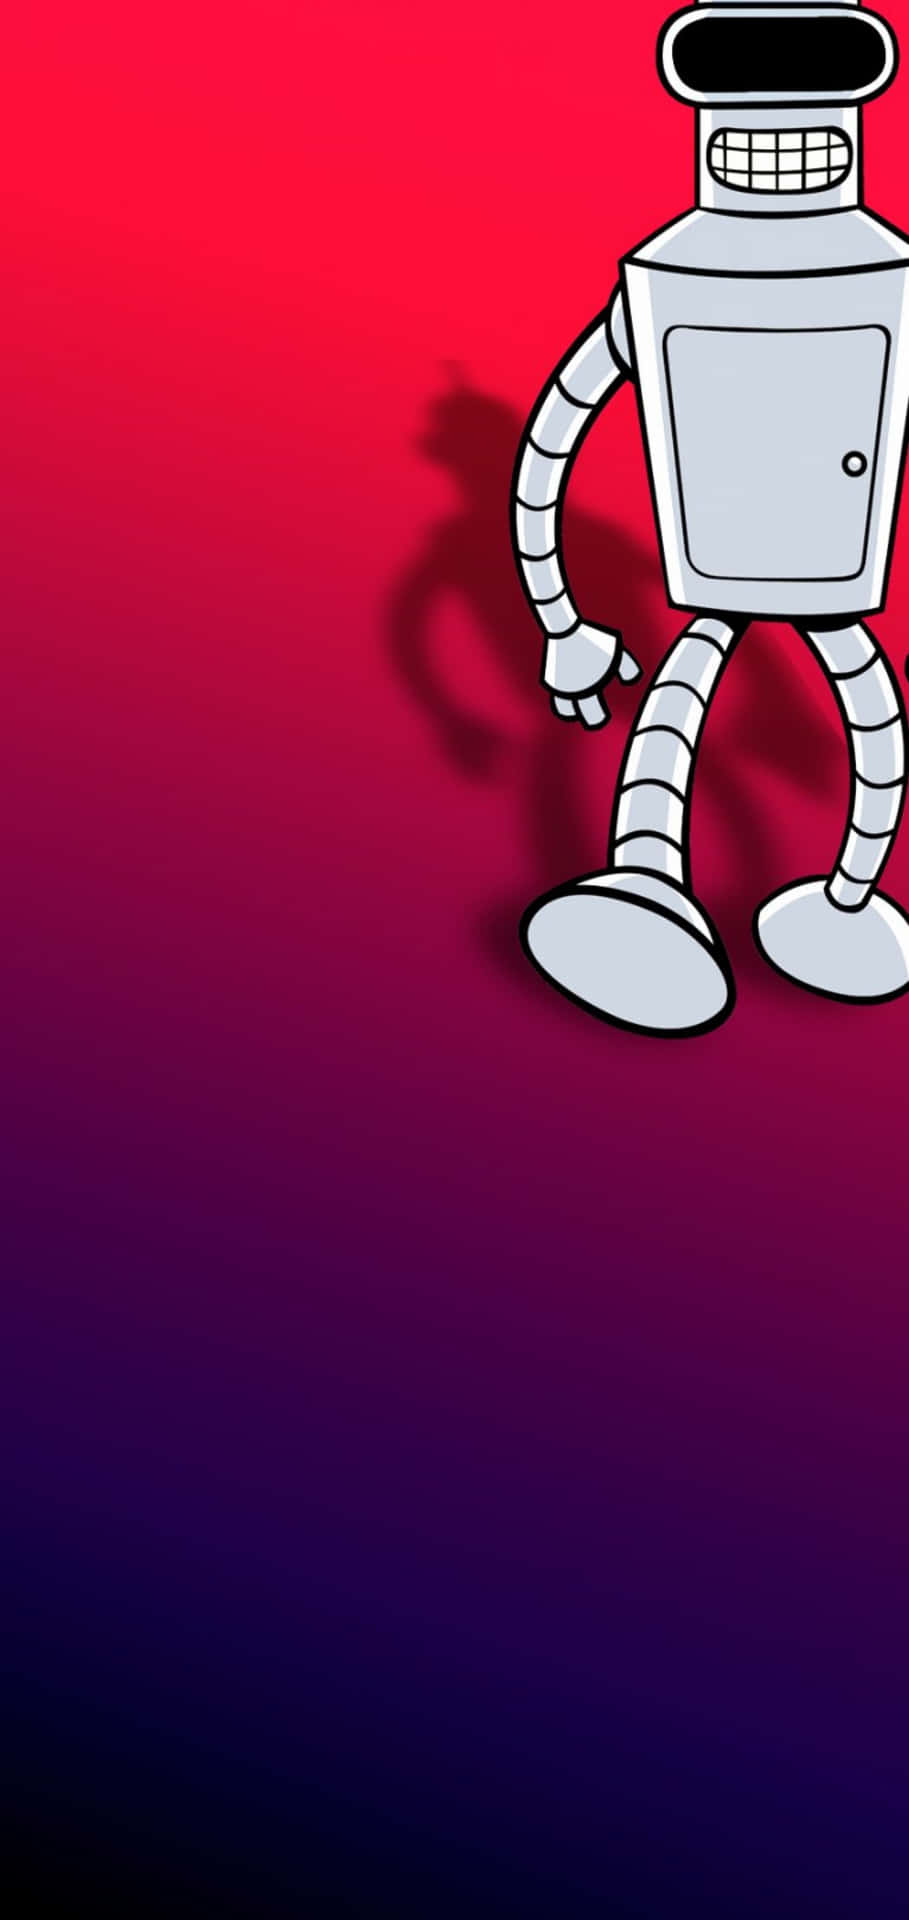 A Robot Standing On A Red And Blue Background